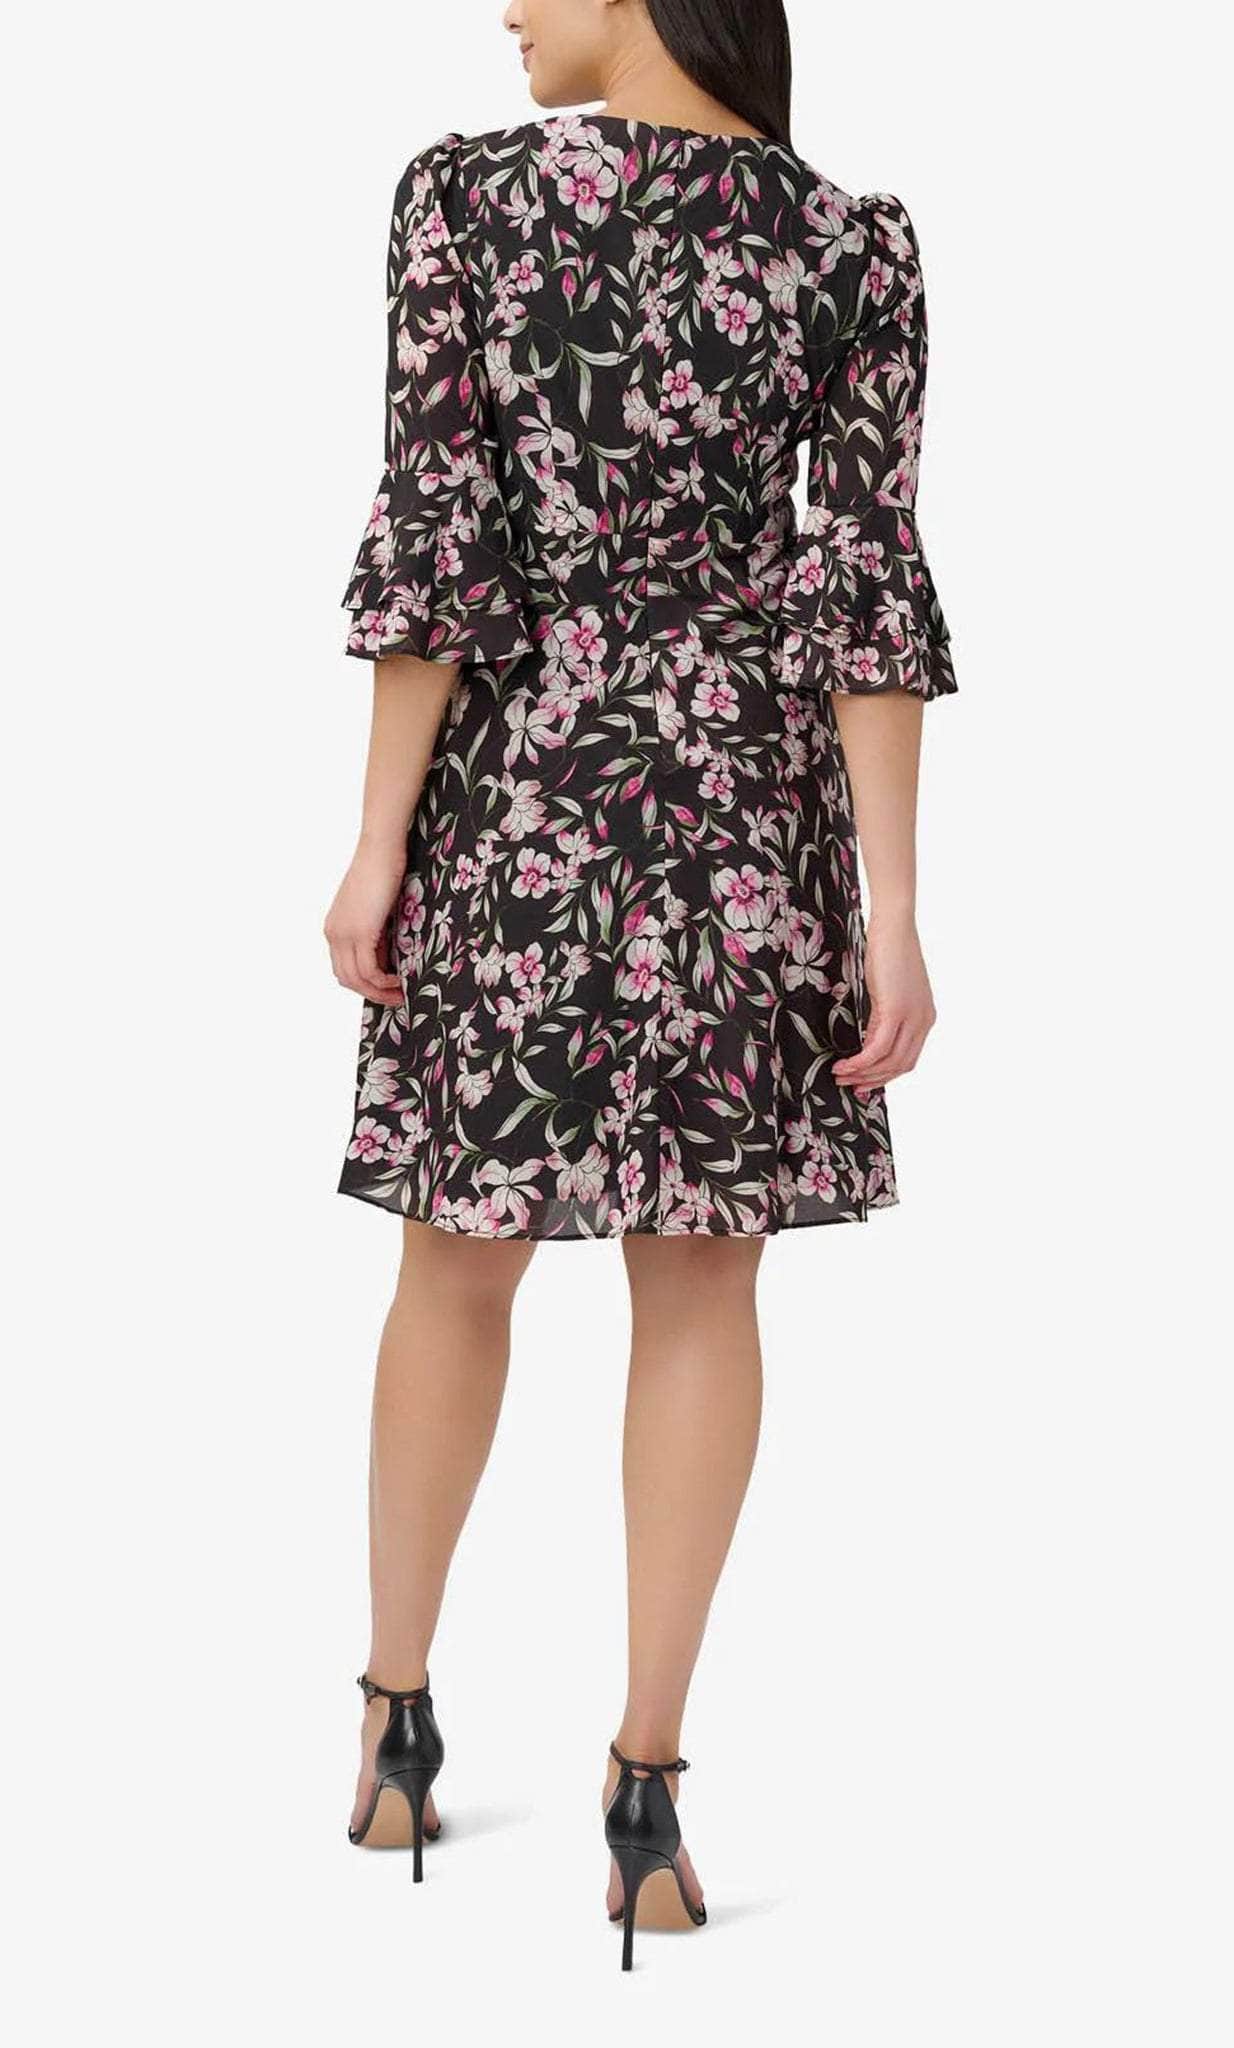 Adrianna Papell AP1D104622 - Bell Sleeve Floral Short Dress Holiday Dresses